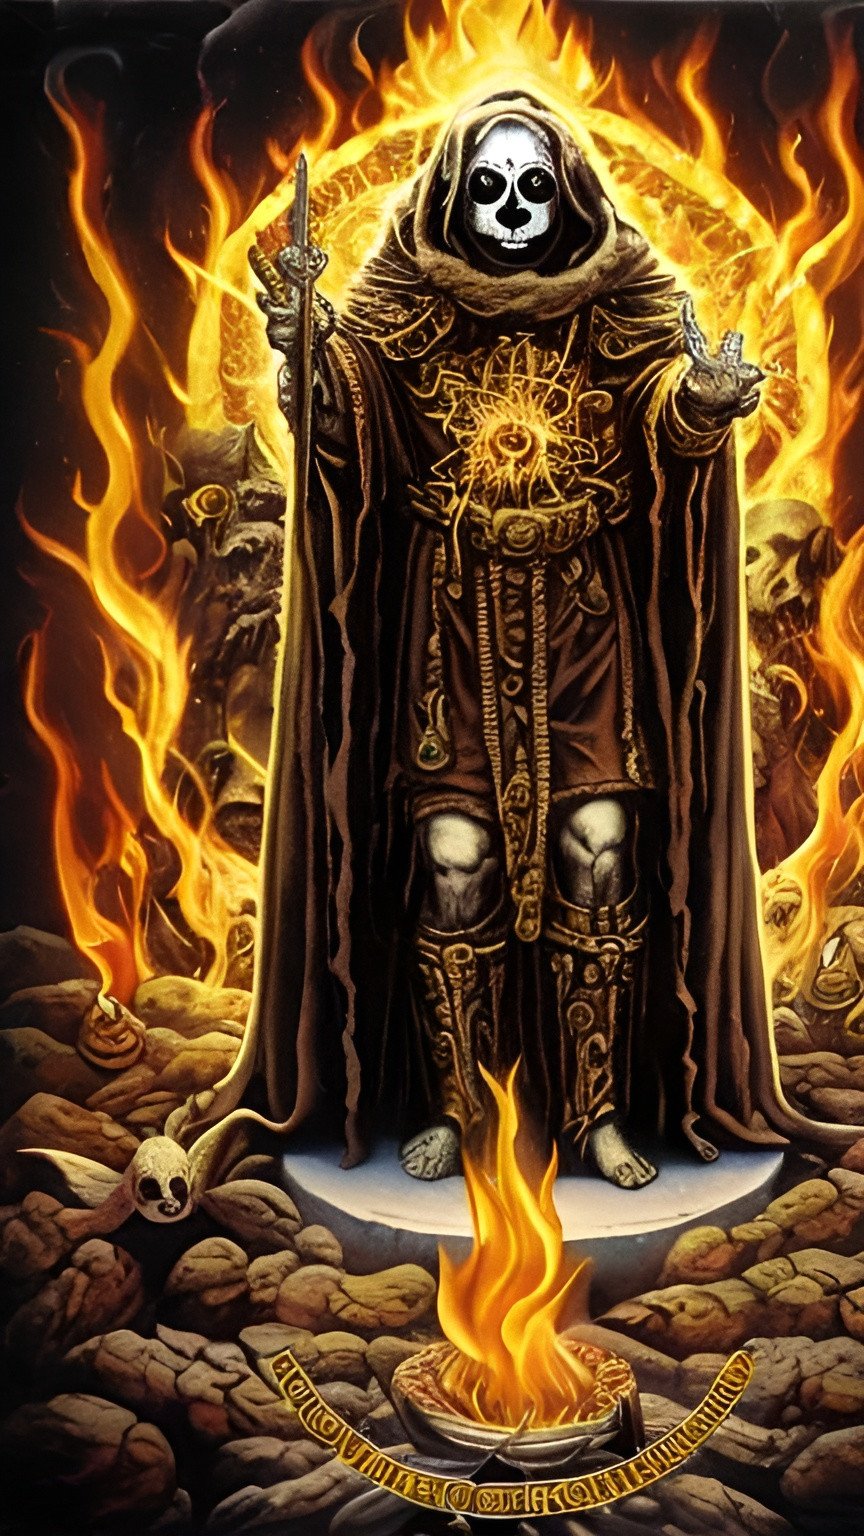 Prompt: The heretic seal beyond divine a prayer to a god who's deaf and blind the last rites for souls on fire